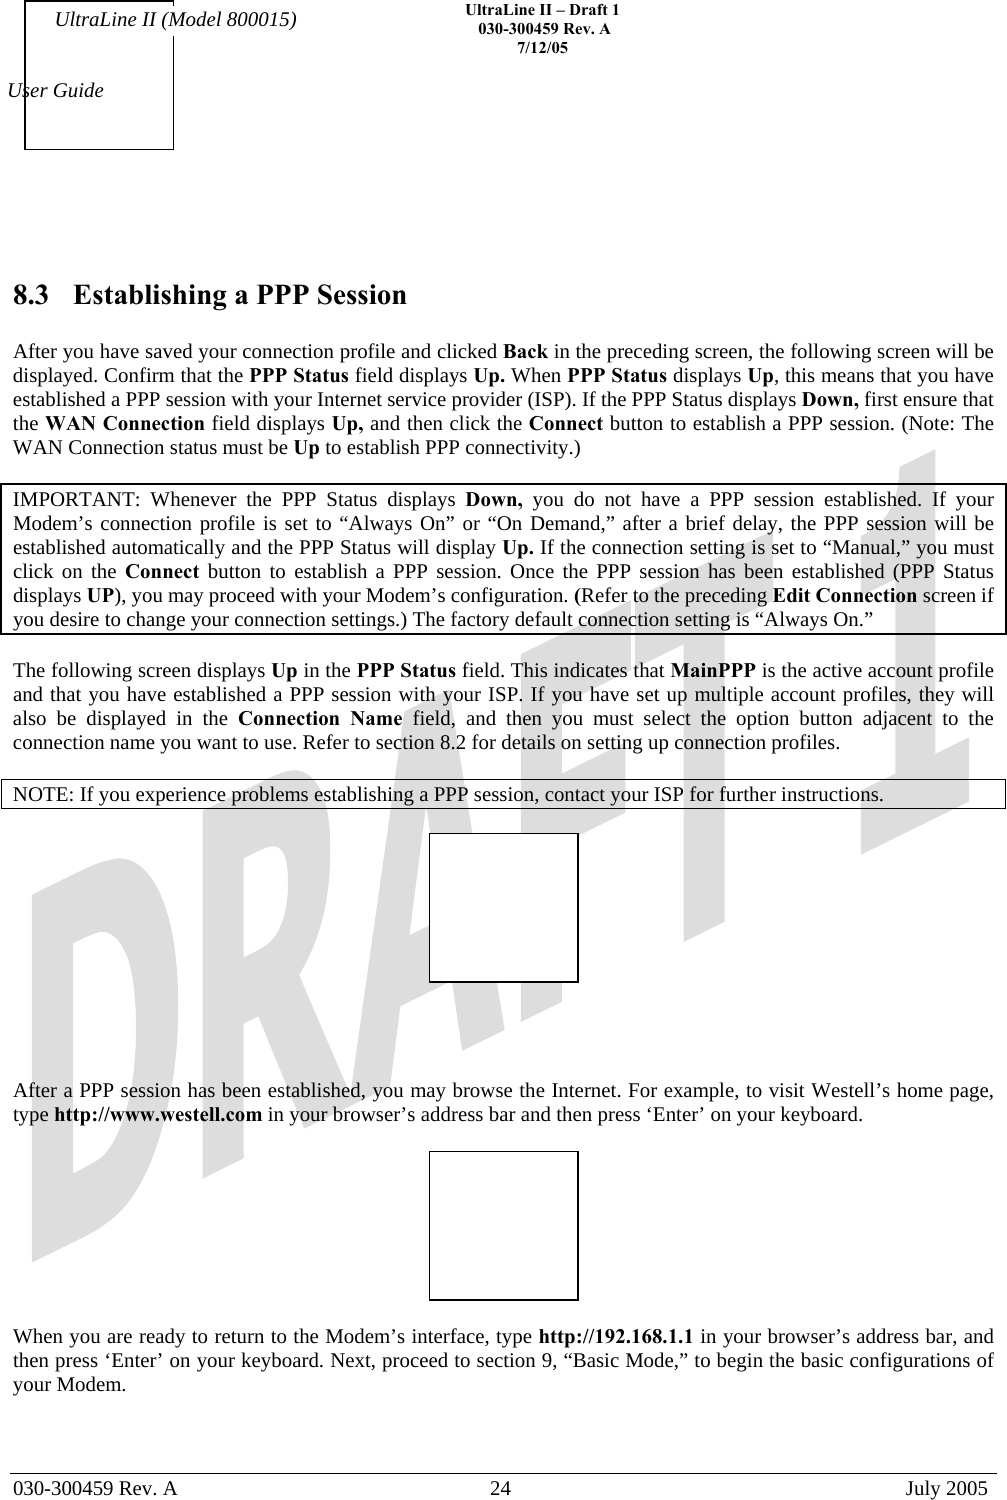    UltraLine II – Draft 1   030-300459 Rev. A 7/12/05   030-300459 Rev. A  24  July 2005  User Guide UltraLine II (Model 800015)   8.3  Establishing a PPP Session  After you have saved your connection profile and clicked Back in the preceding screen, the following screen will be displayed. Confirm that the PPP Status field displays Up. When PPP Status displays Up, this means that you have established a PPP session with your Internet service provider (ISP). If the PPP Status displays Down, first ensure that the WAN Connection field displays Up, and then click the Connect button to establish a PPP session. (Note: The WAN Connection status must be Up to establish PPP connectivity.)  IMPORTANT: Whenever the PPP Status displays Down, you do not have a PPP session established. If your Modem’s connection profile is set to “Always On” or “On Demand,” after a brief delay, the PPP session will be established automatically and the PPP Status will display Up. If the connection setting is set to “Manual,” you must click on the Connect  button to establish a PPP session. Once the PPP session has been established (PPP Status displays UP), you may proceed with your Modem’s configuration. (Refer to the preceding Edit Connection screen if you desire to change your connection settings.) The factory default connection setting is “Always On.”  The following screen displays Up in the PPP Status field. This indicates that MainPPP is the active account profile and that you have established a PPP session with your ISP. If you have set up multiple account profiles, they will also be displayed in the Connection Name field, and then you must select the option button adjacent to the connection name you want to use. Refer to section 8.2 for details on setting up connection profiles.  NOTE: If you experience problems establishing a PPP session, contact your ISP for further instructions.       After a PPP session has been established, you may browse the Internet. For example, to visit Westell’s home page, type http://www.westell.com in your browser’s address bar and then press ‘Enter’ on your keyboard.     When you are ready to return to the Modem’s interface, type http://192.168.1.1 in your browser’s address bar, and then press ‘Enter’ on your keyboard. Next, proceed to section 9, “Basic Mode,” to begin the basic configurations of your Modem.    